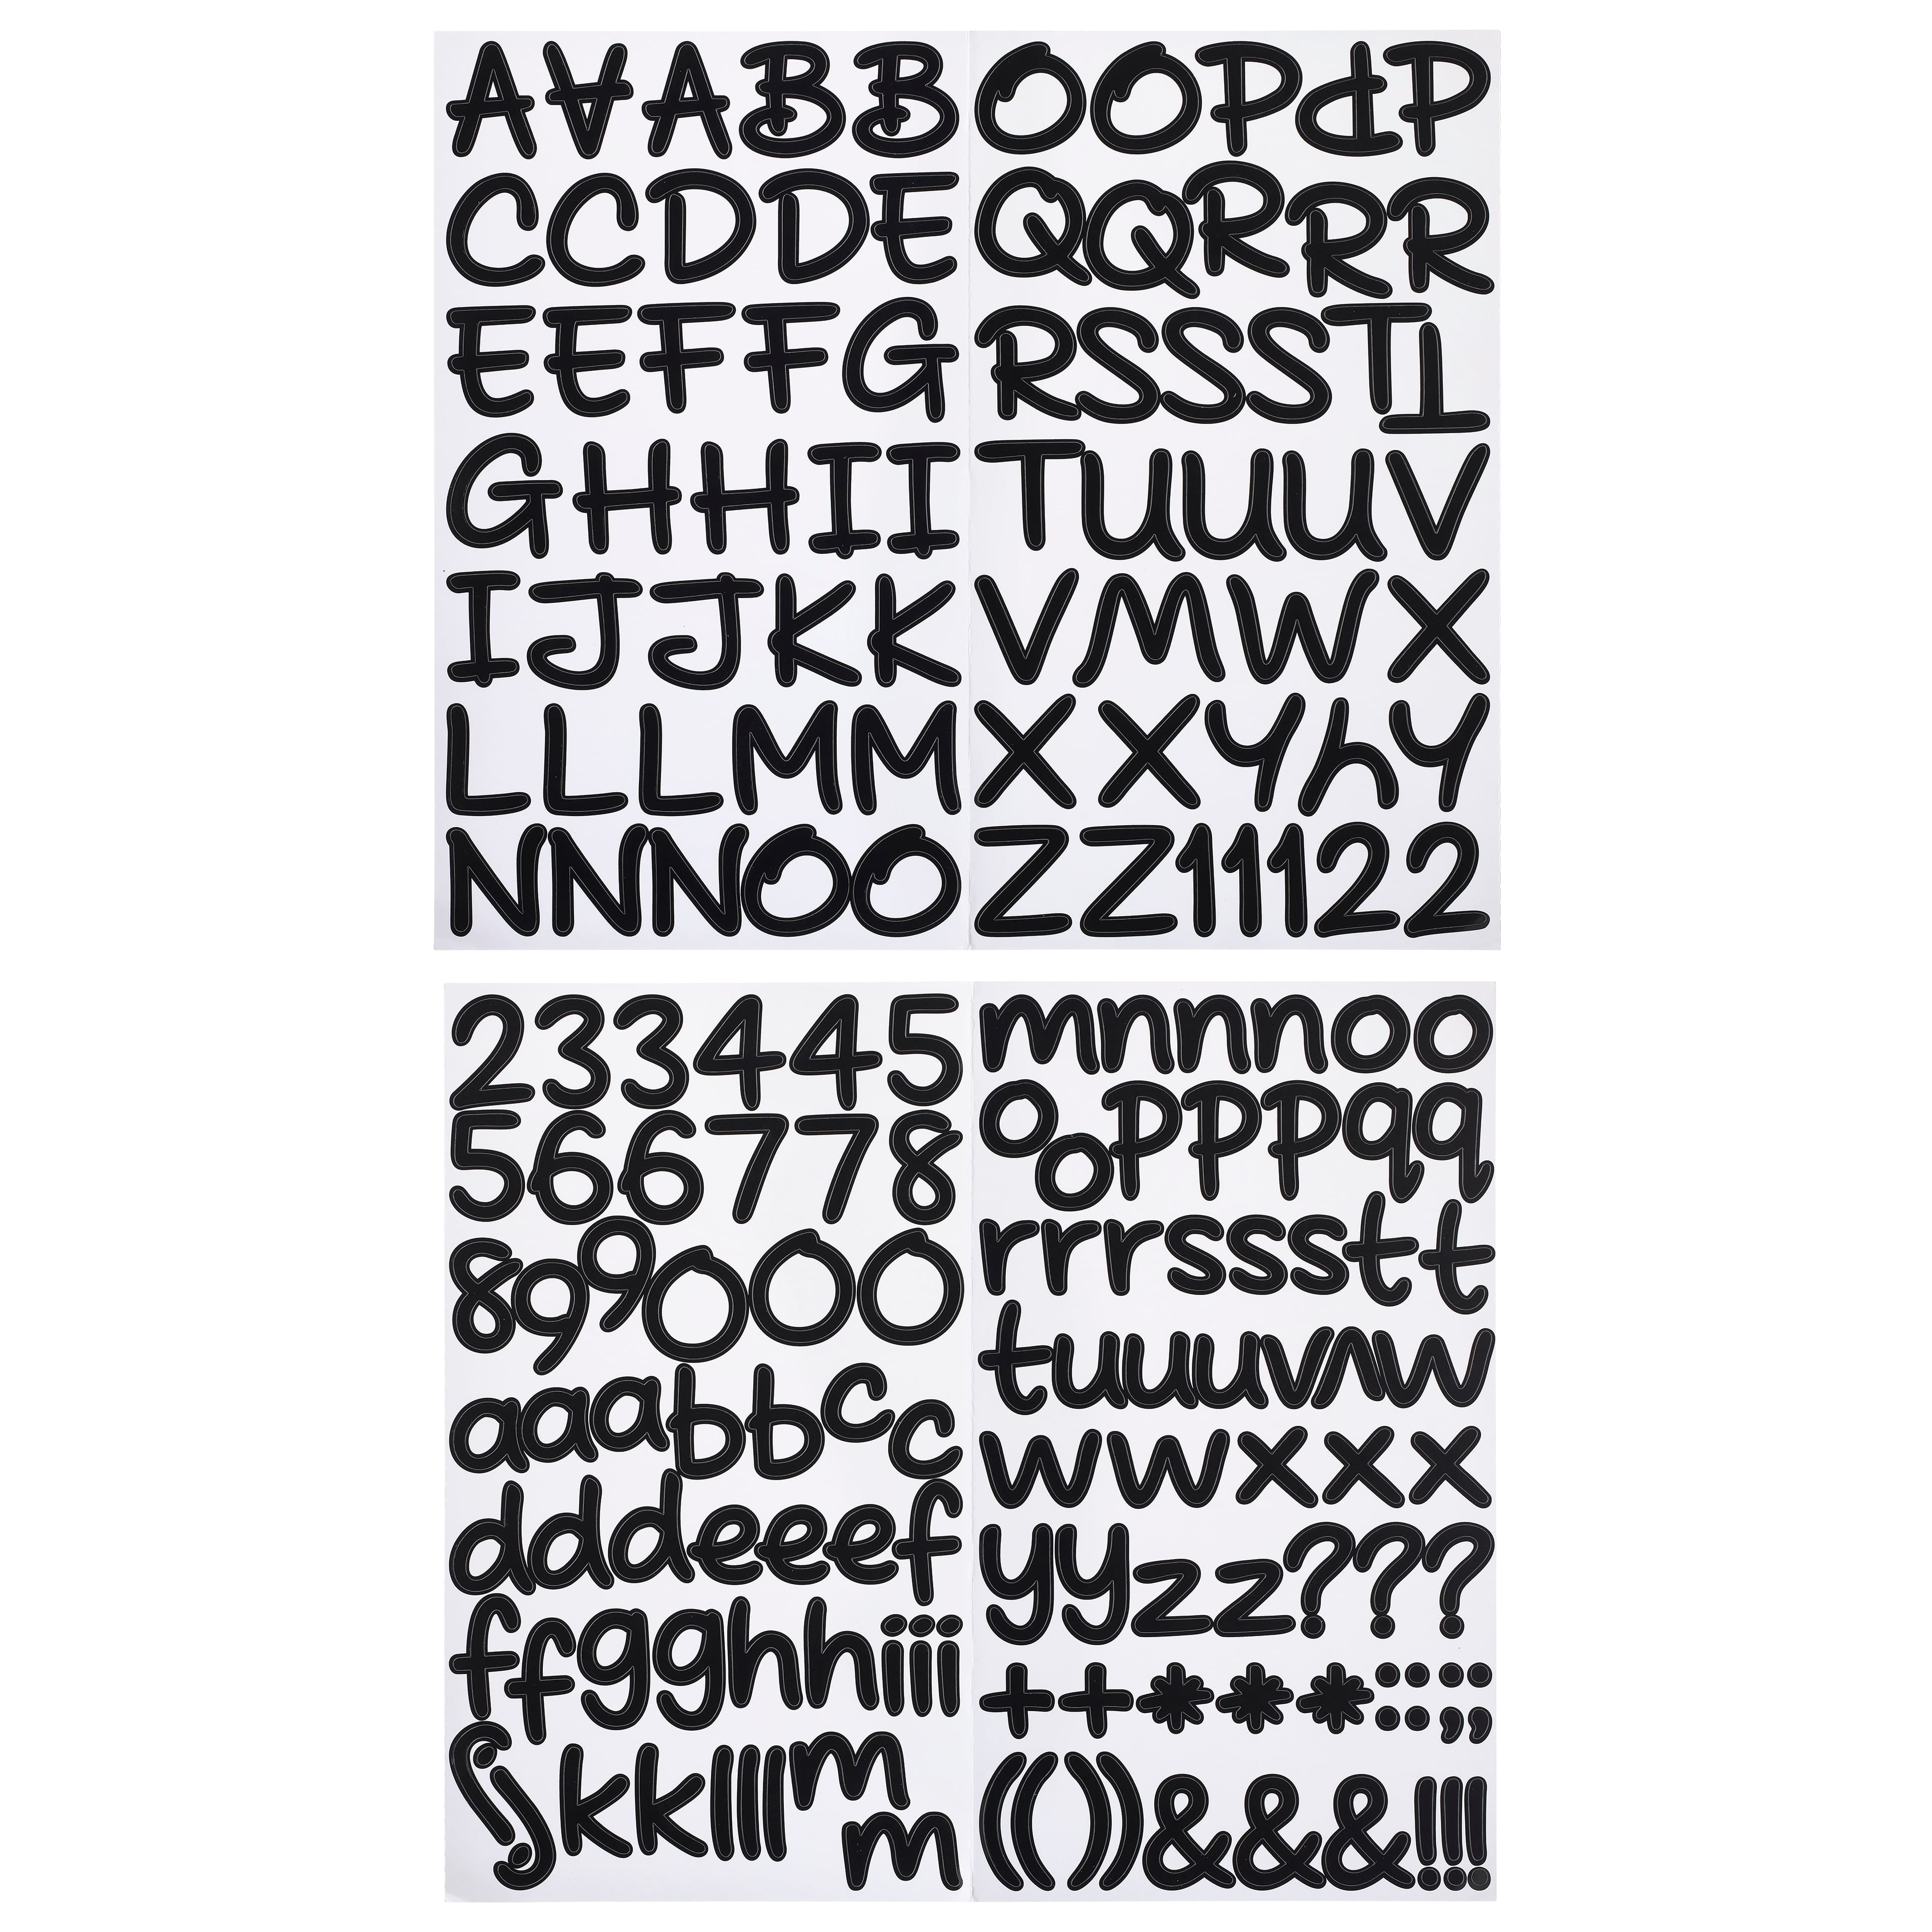 Black Alphabet Stickers by Recollections™